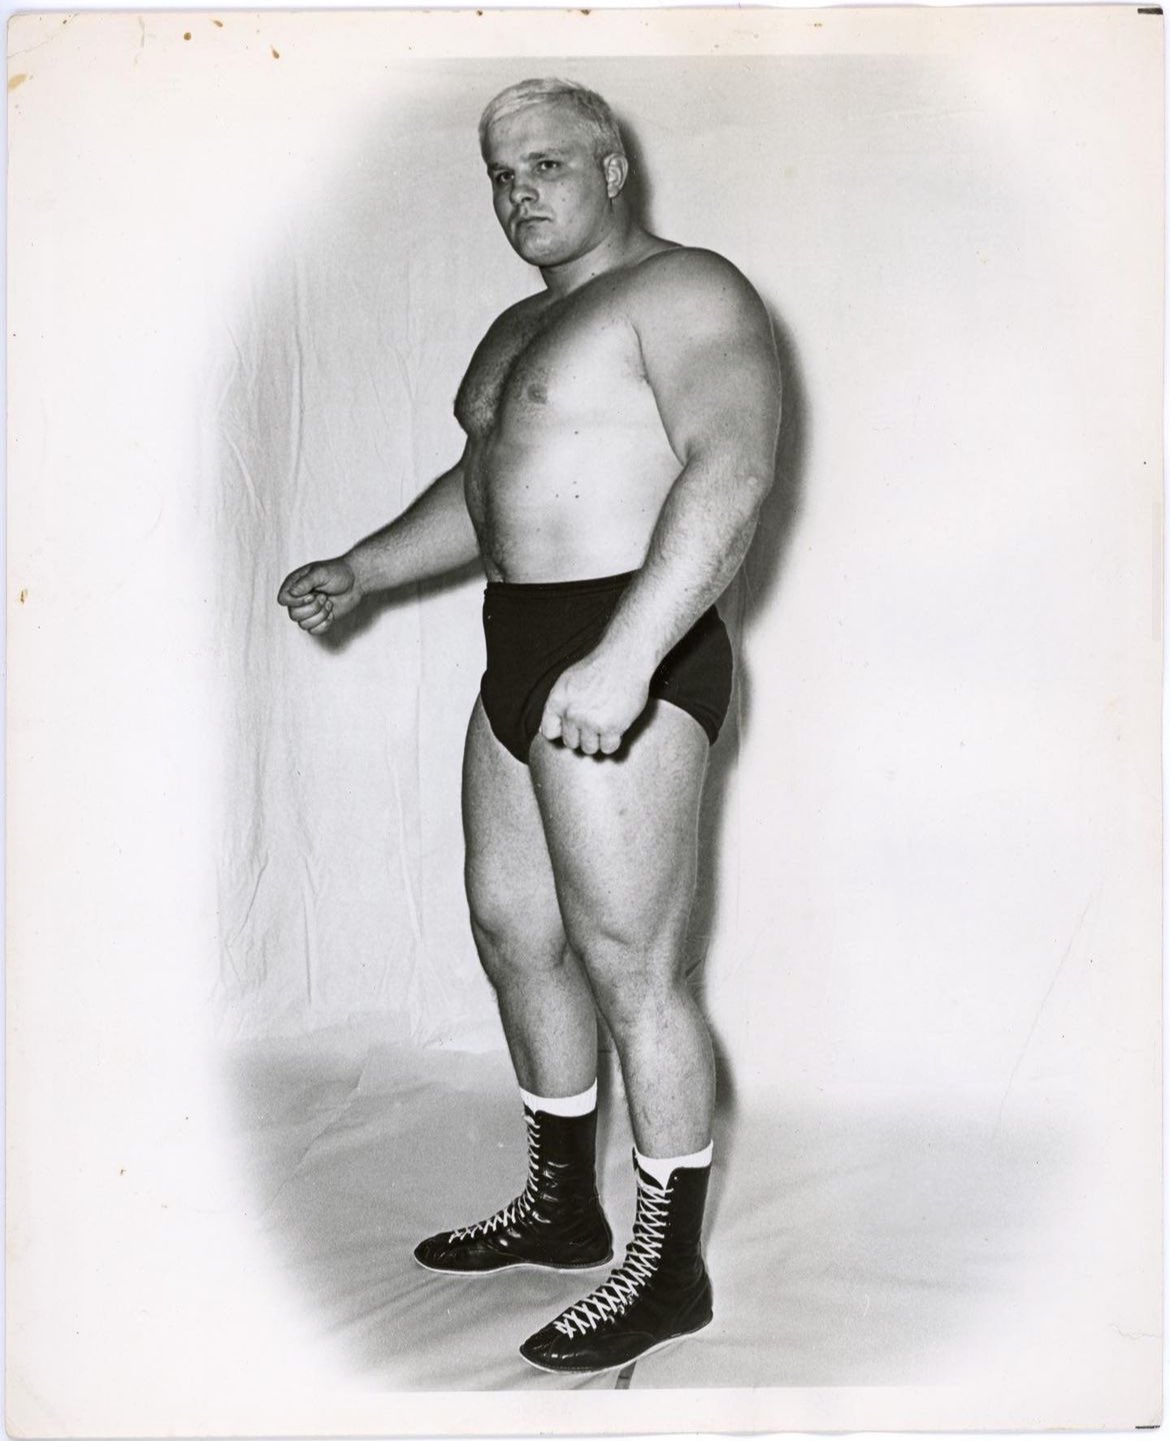 A young Ole Anderson.